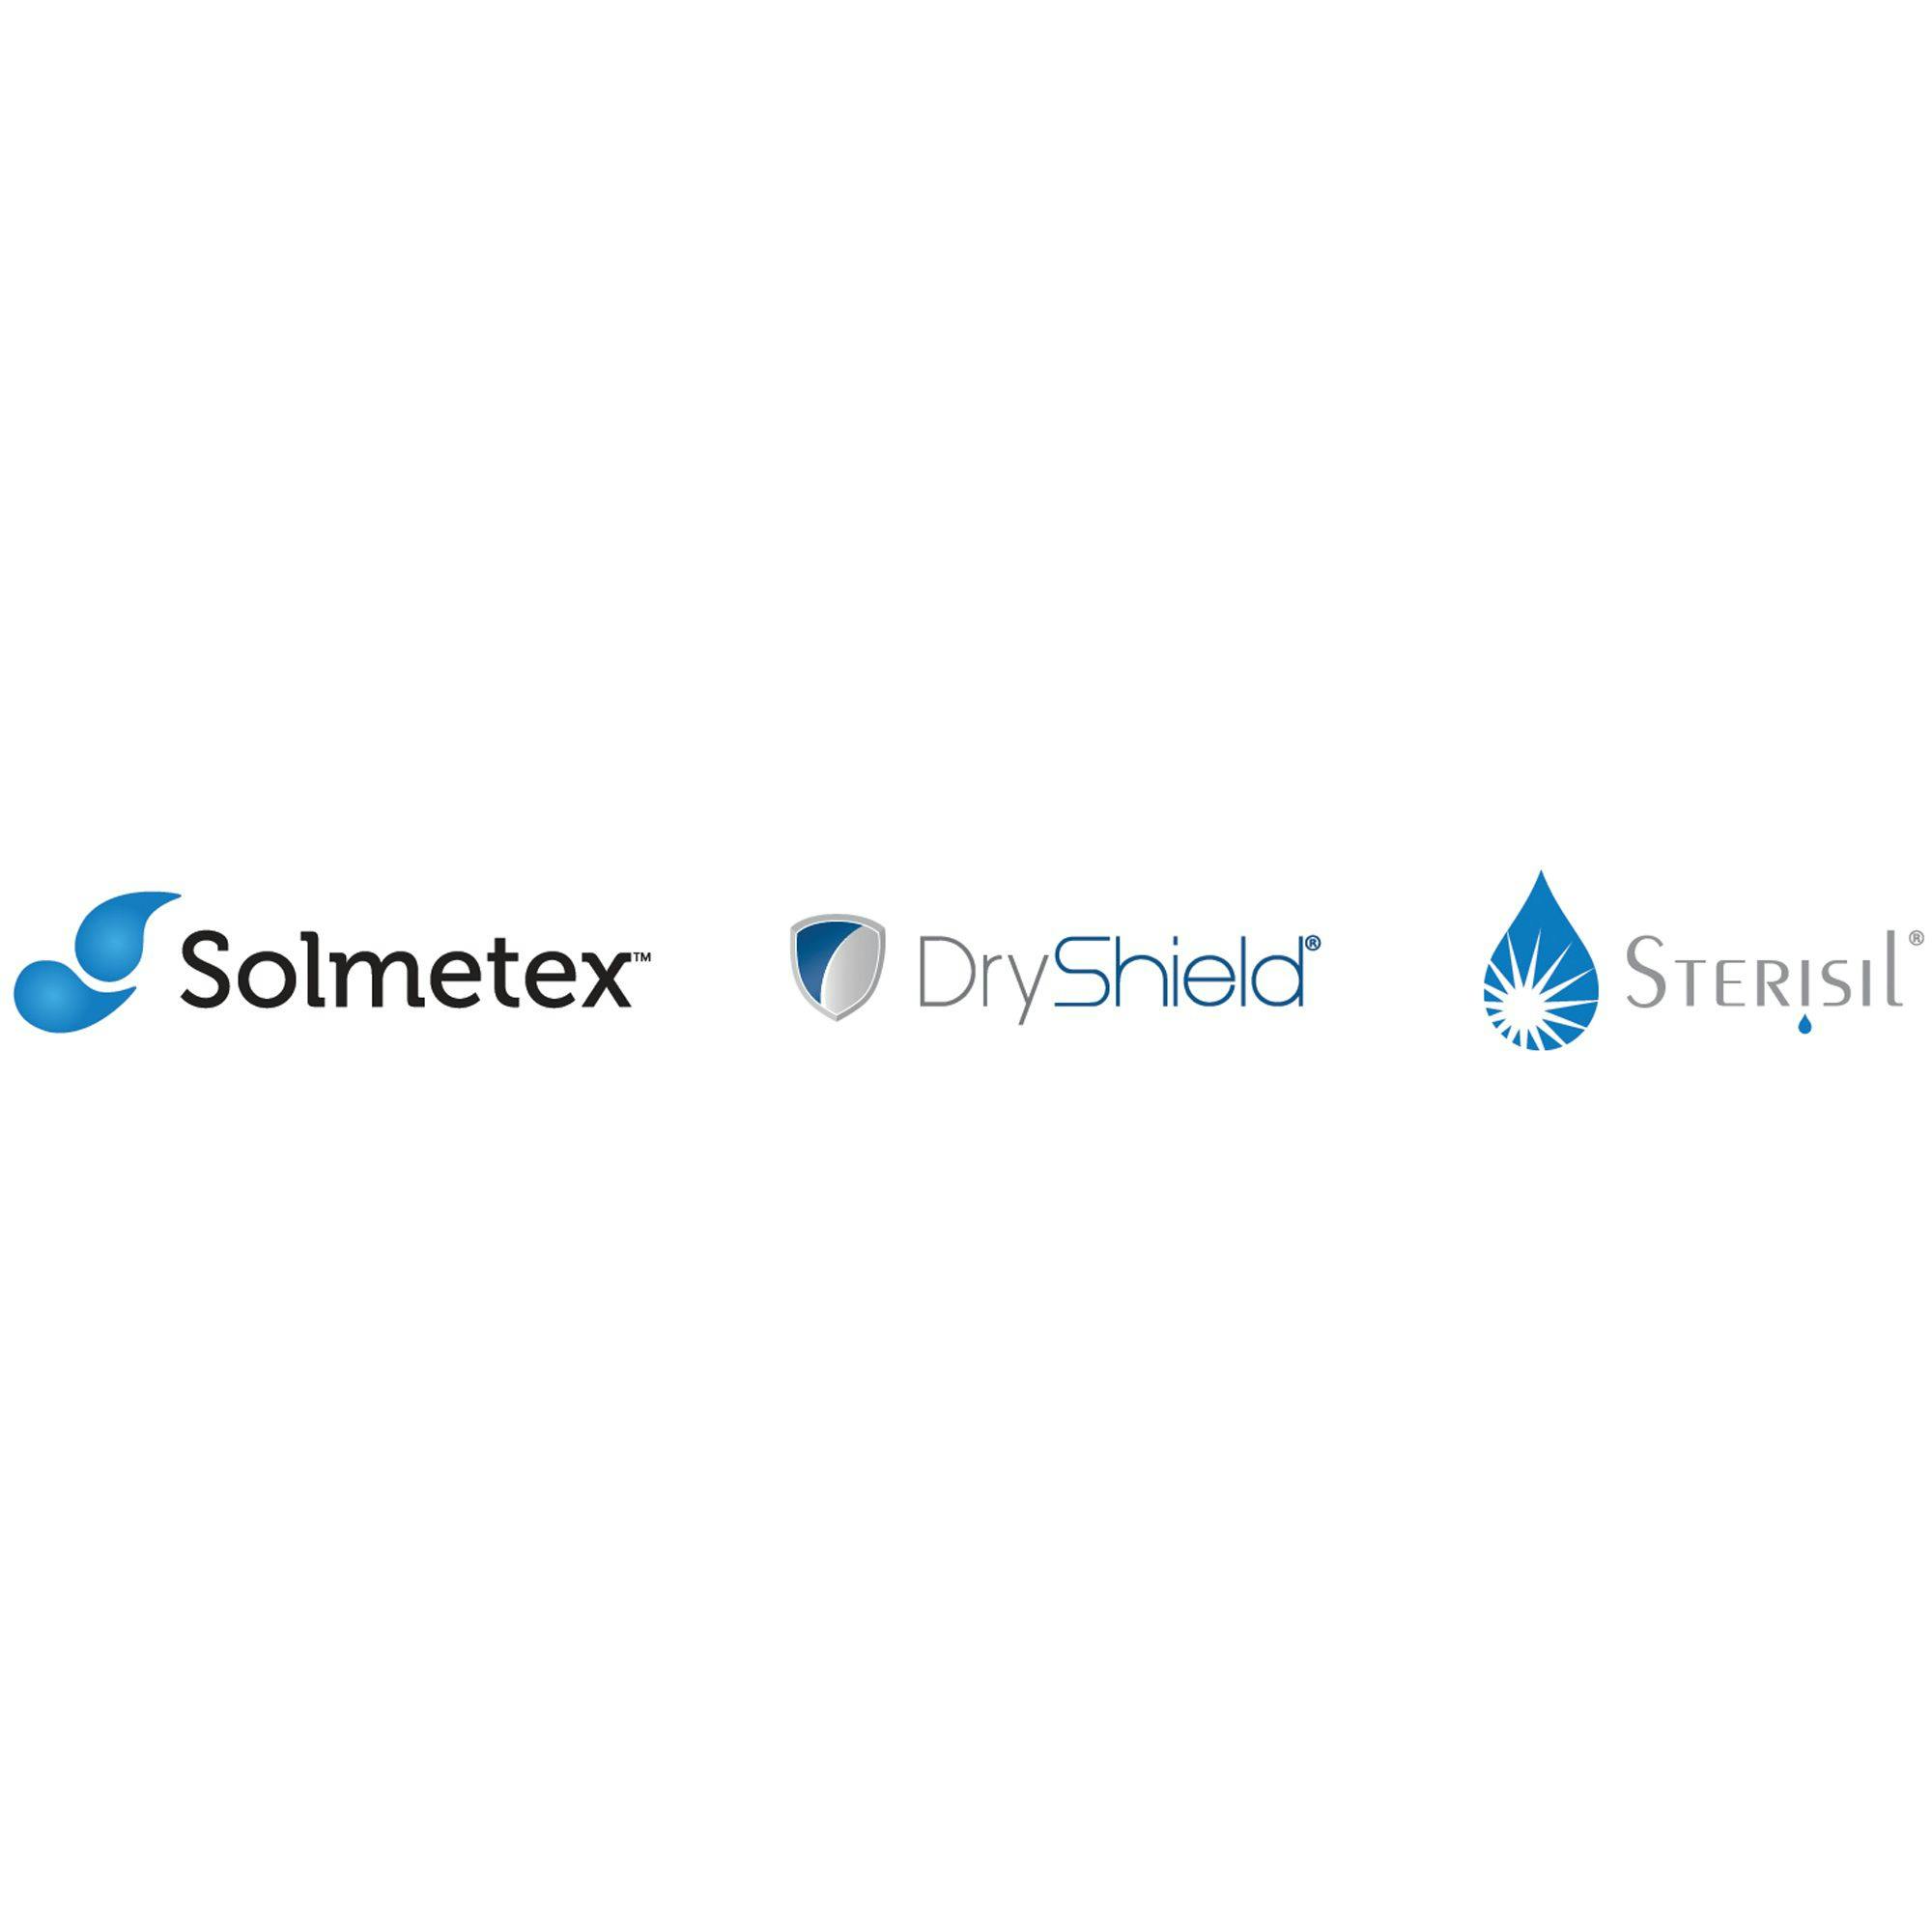 Solmetex System of Water Solutions | Image Credit: Solmetex